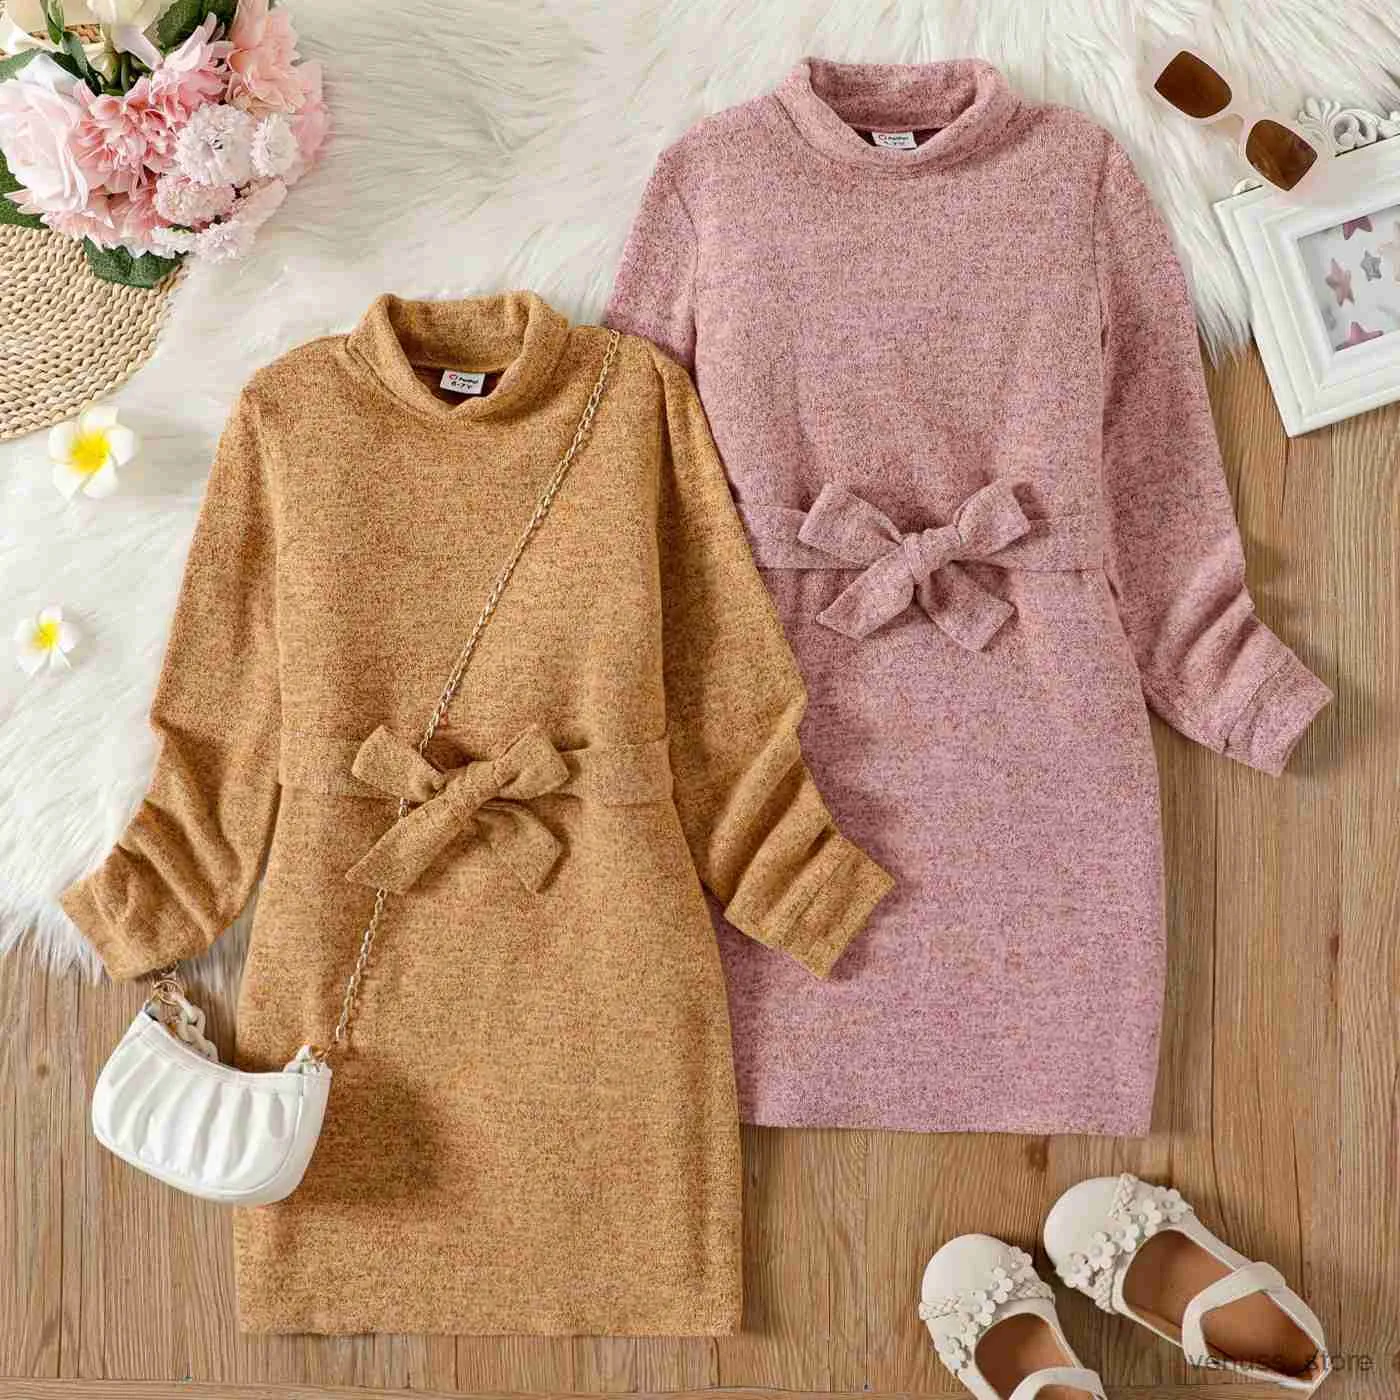 Girl's Dresses Kid Girl Solid Color Turtleneck Belted Long-sleeve Dress (Bag is not included) Perfect for Outings and Daily Wear